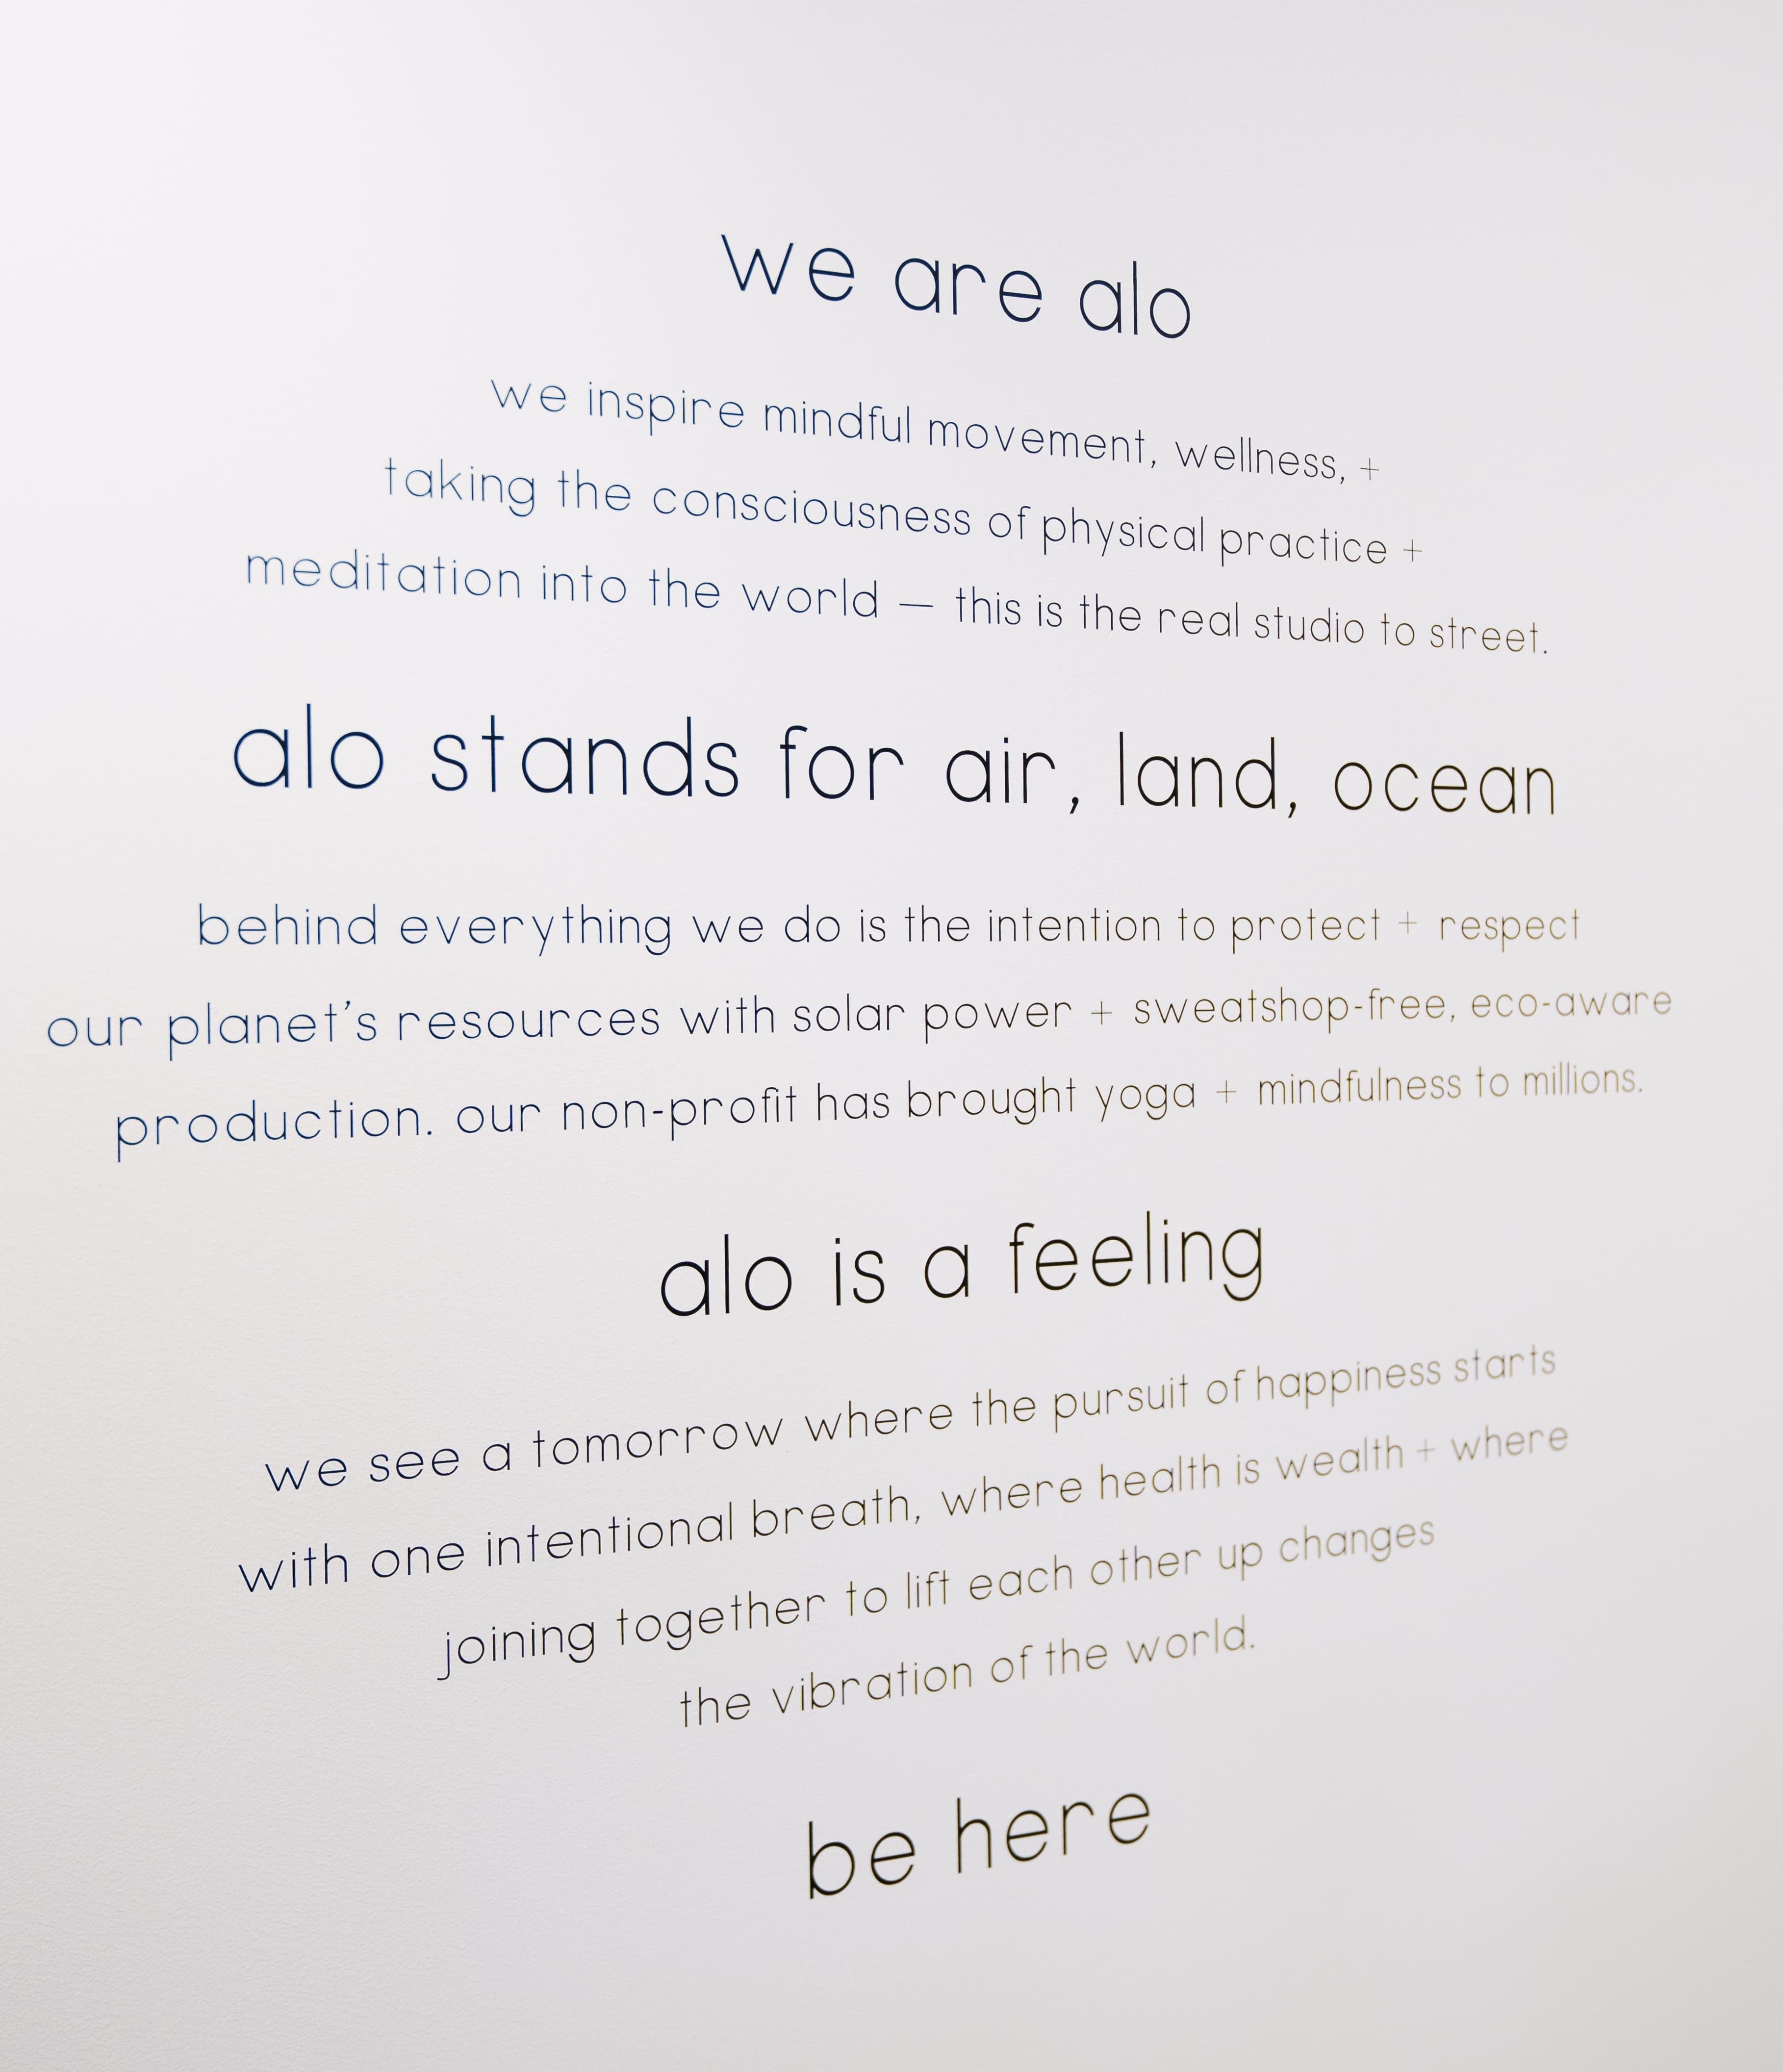 A photo of a wall sticker at the Alo Old Orchard store in Skokie Illinois with the headers, “We are Alo,” “Alo stands for air, land, ocean,” “Alo is a feeling,” and “be here” with sub-headers underneath that are slightly blurred.  